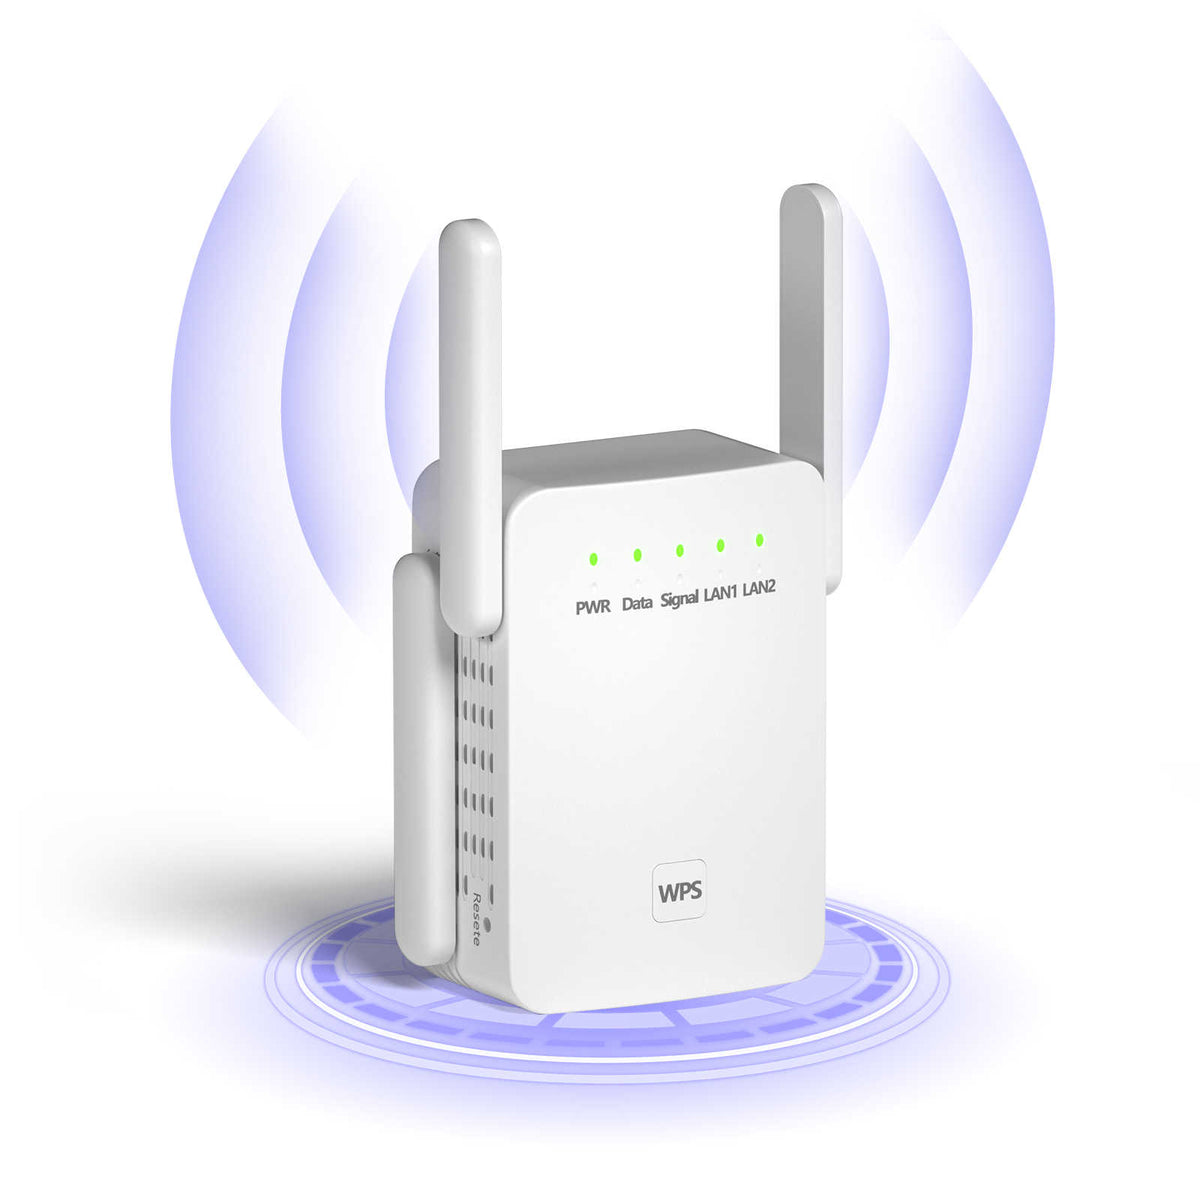 GOBOOST-AC1200 WiFi Extender, Dual Band 2.4GHz/5GHz with Port